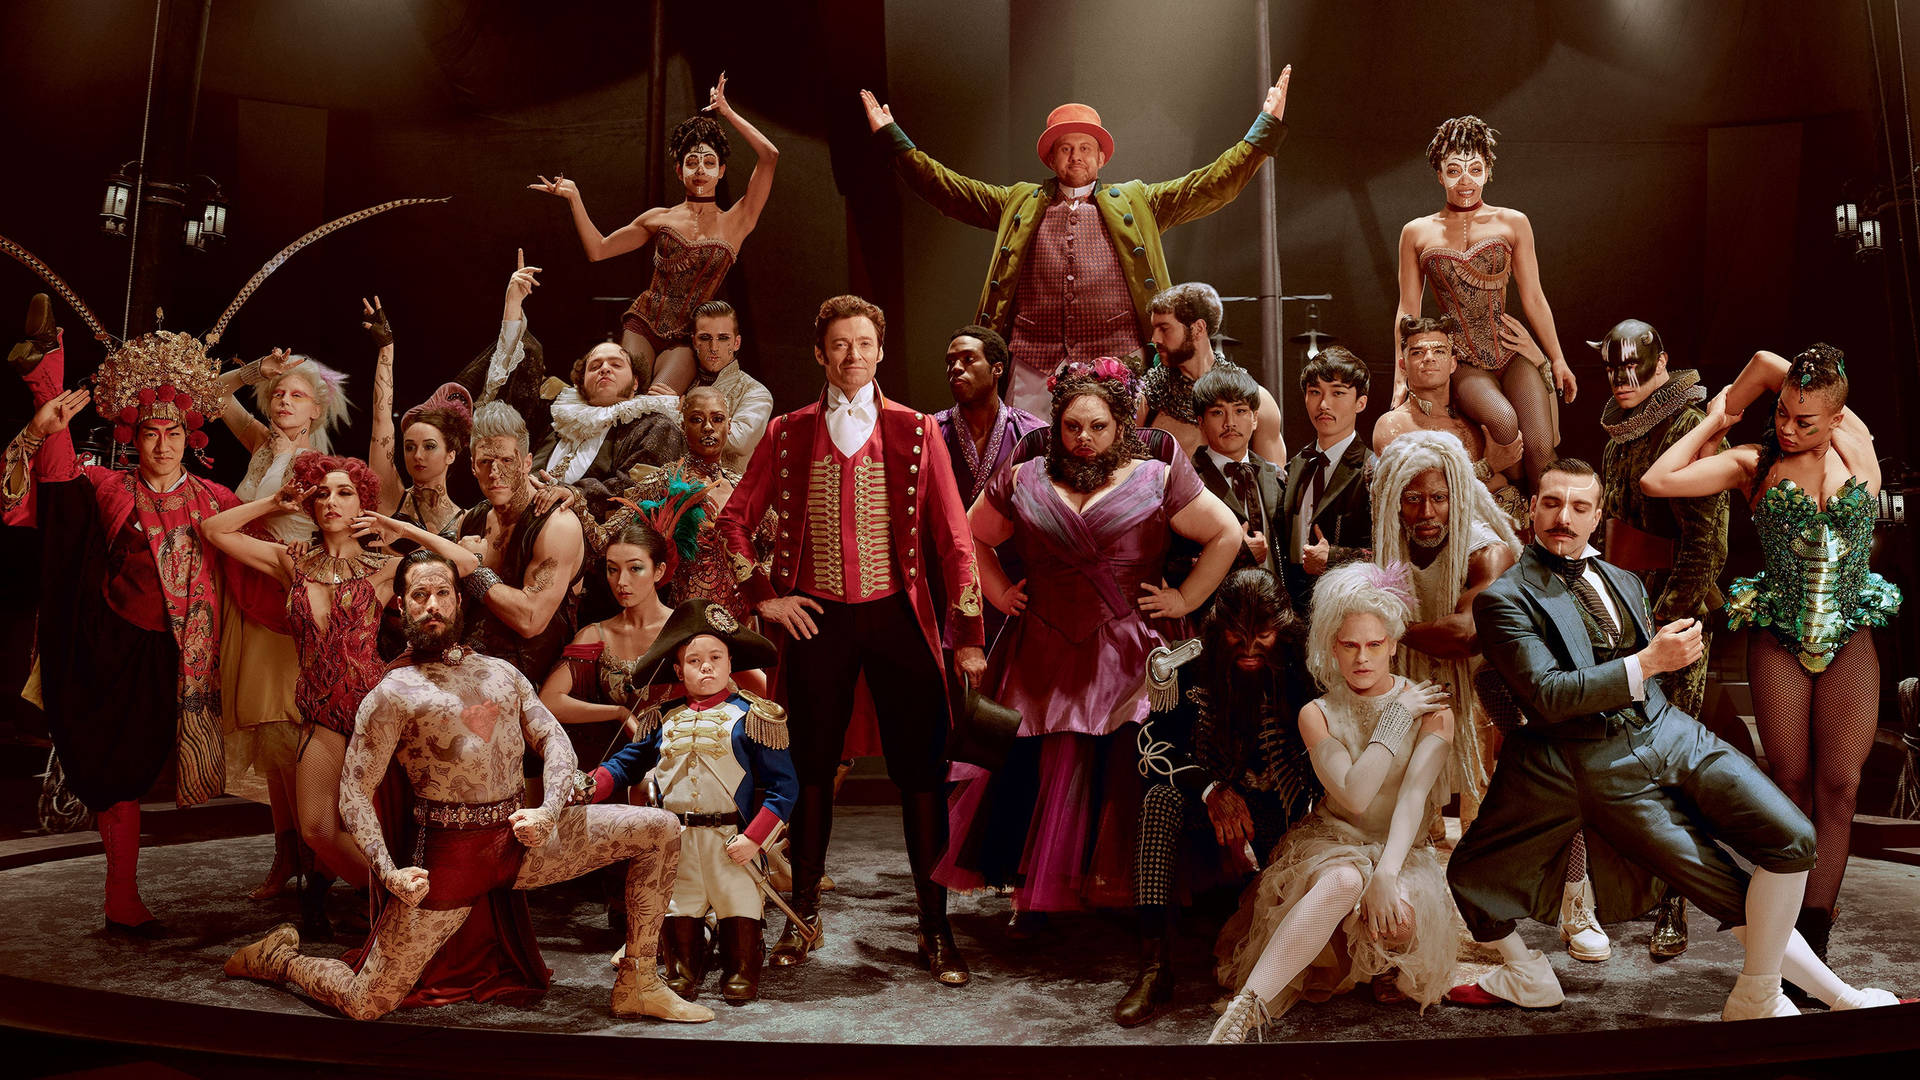 Top 999+ The Greatest Showman Wallpapers Full HD, 4K✅Free to Use